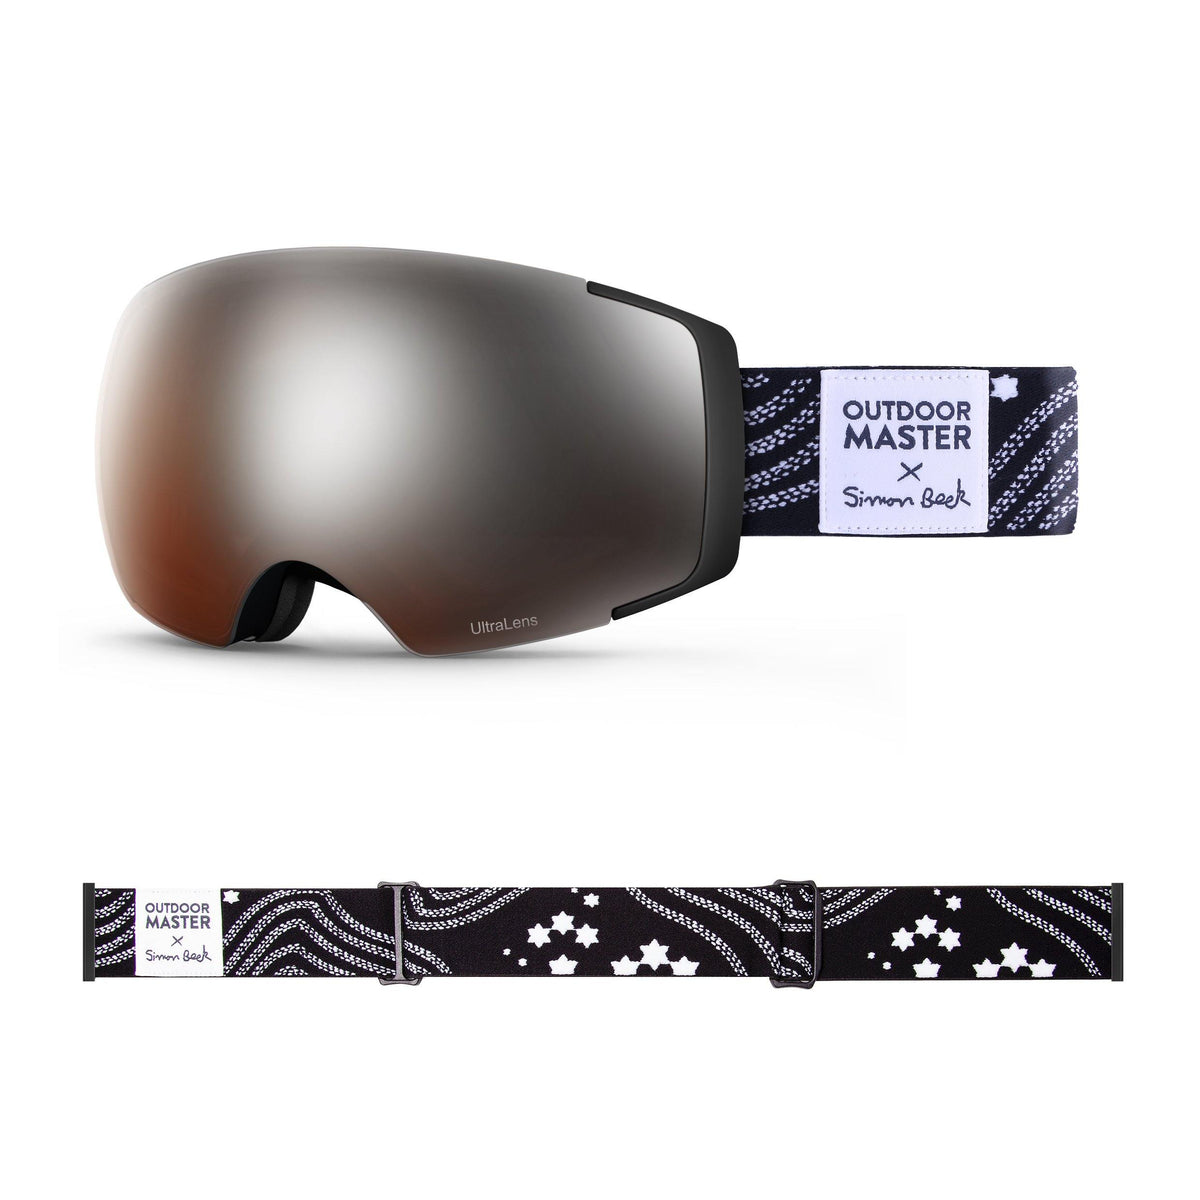 OutdoorMaster x Simon Beck Ski Goggles Pro Series - Snowshoeing Art Limited Edition OutdoorMaster LutraLens VLT 13% Optimized Orange with REVO Silver Star Road-Black